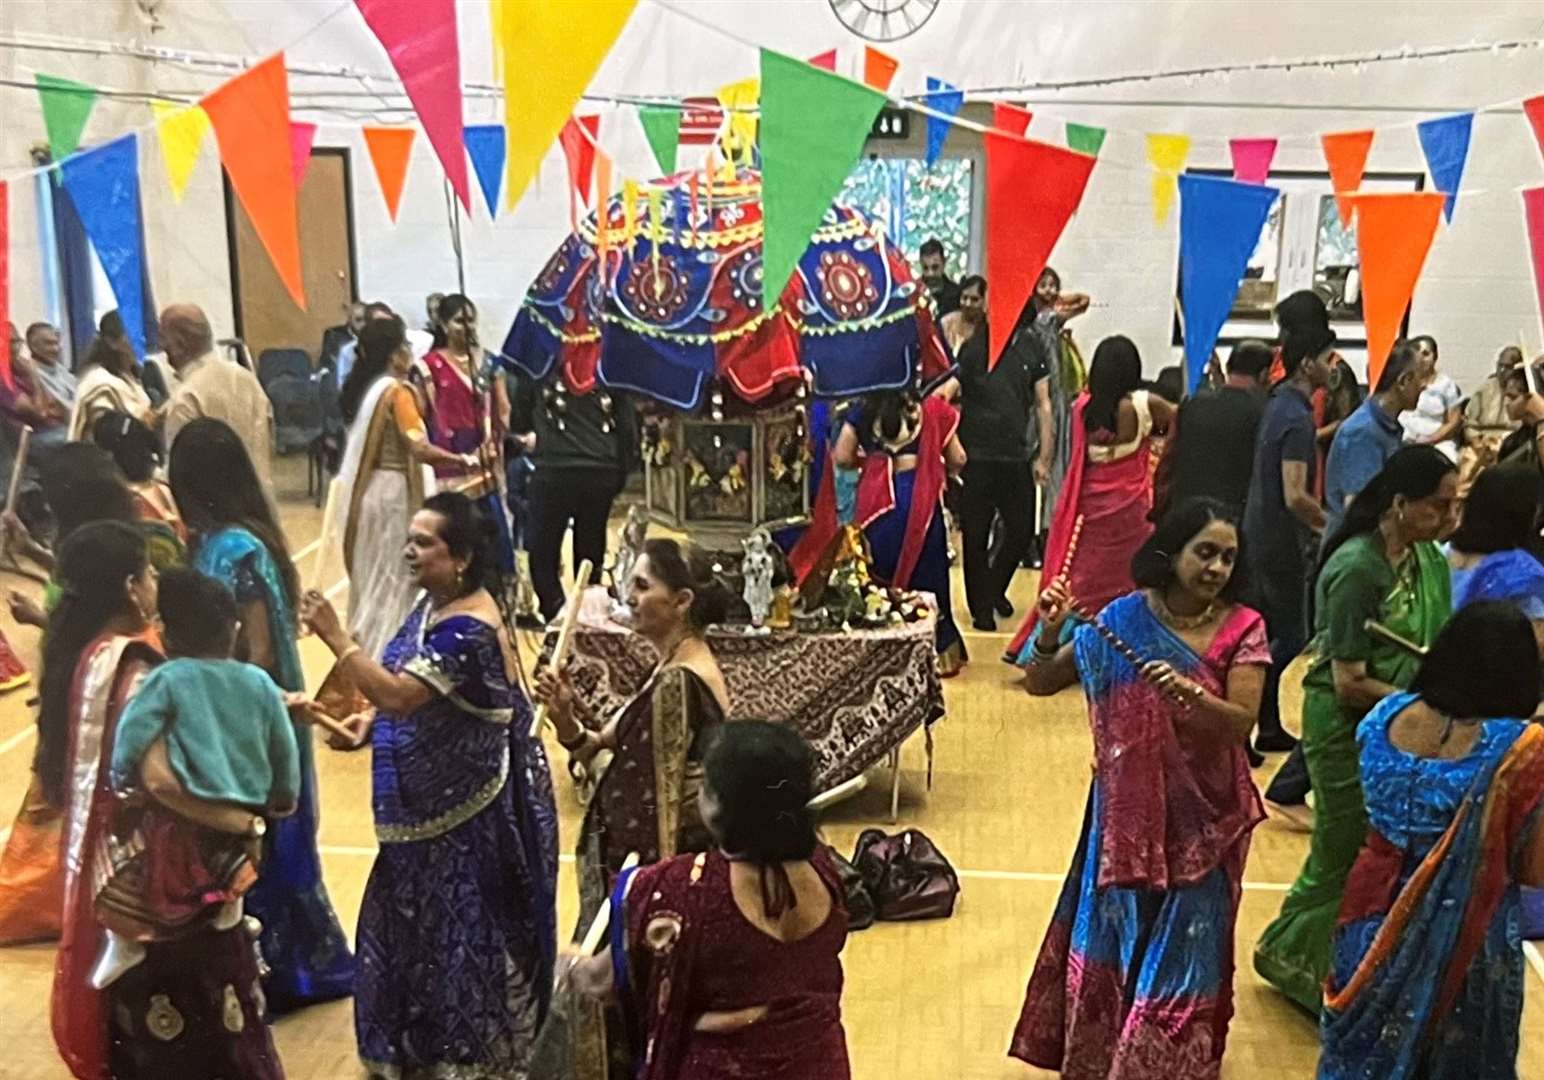 Men and women perform a special dance with dandiya sticks